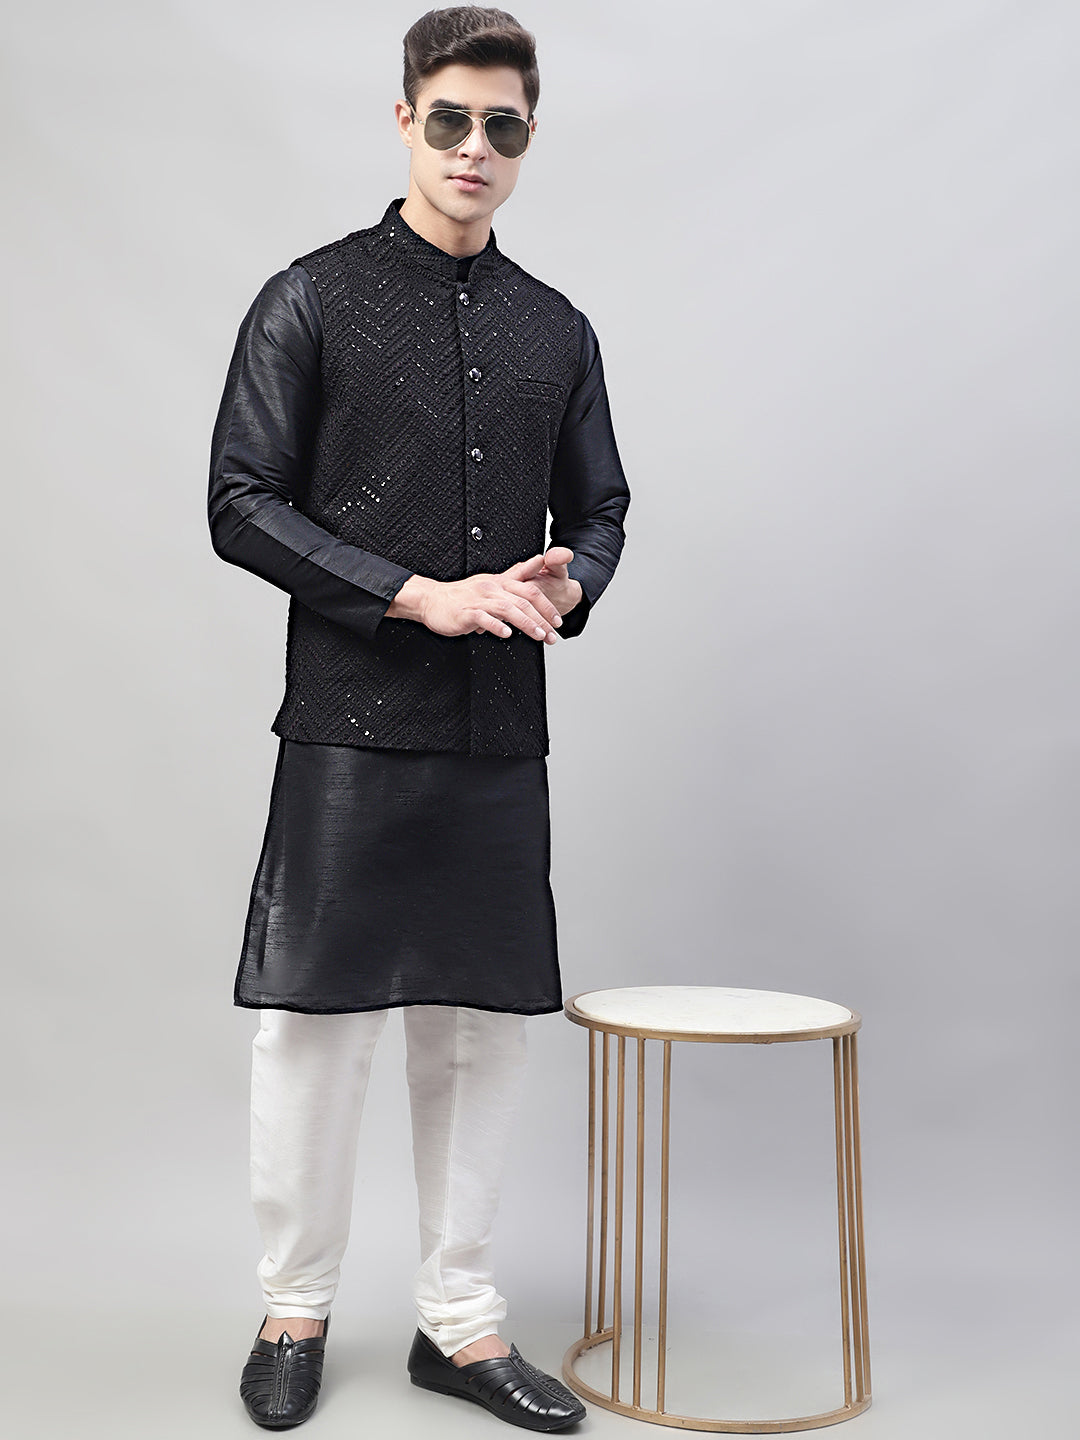 Shop Now Outluk Vol 121 Mens Kurta Pajama With Jacket Collection Full  Catalog Available At Wholesale Rate